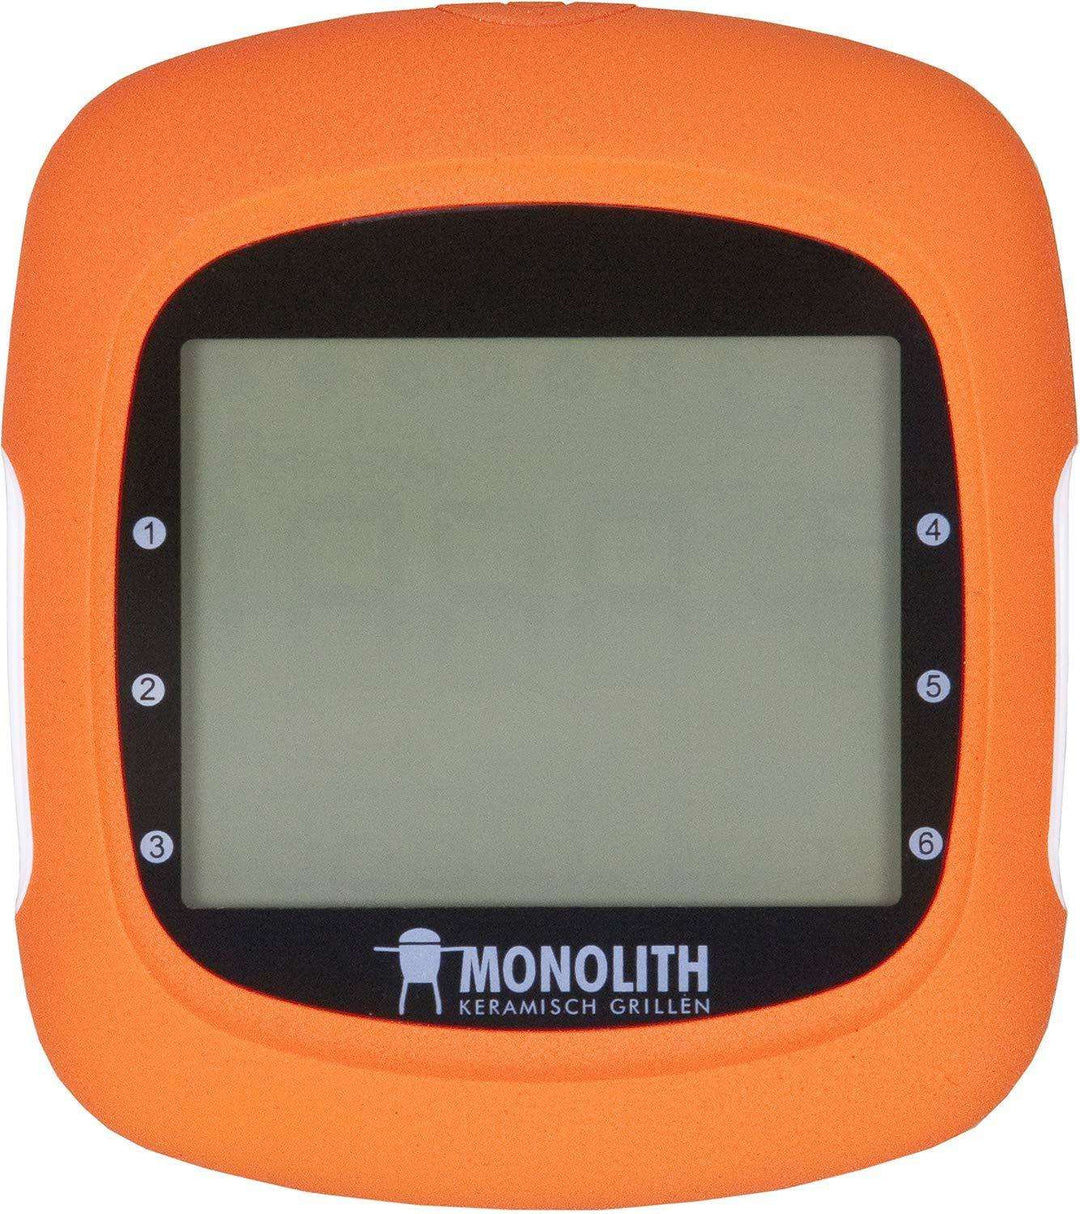 Monolith Thermo-Lith Smart Wireless Thermometer